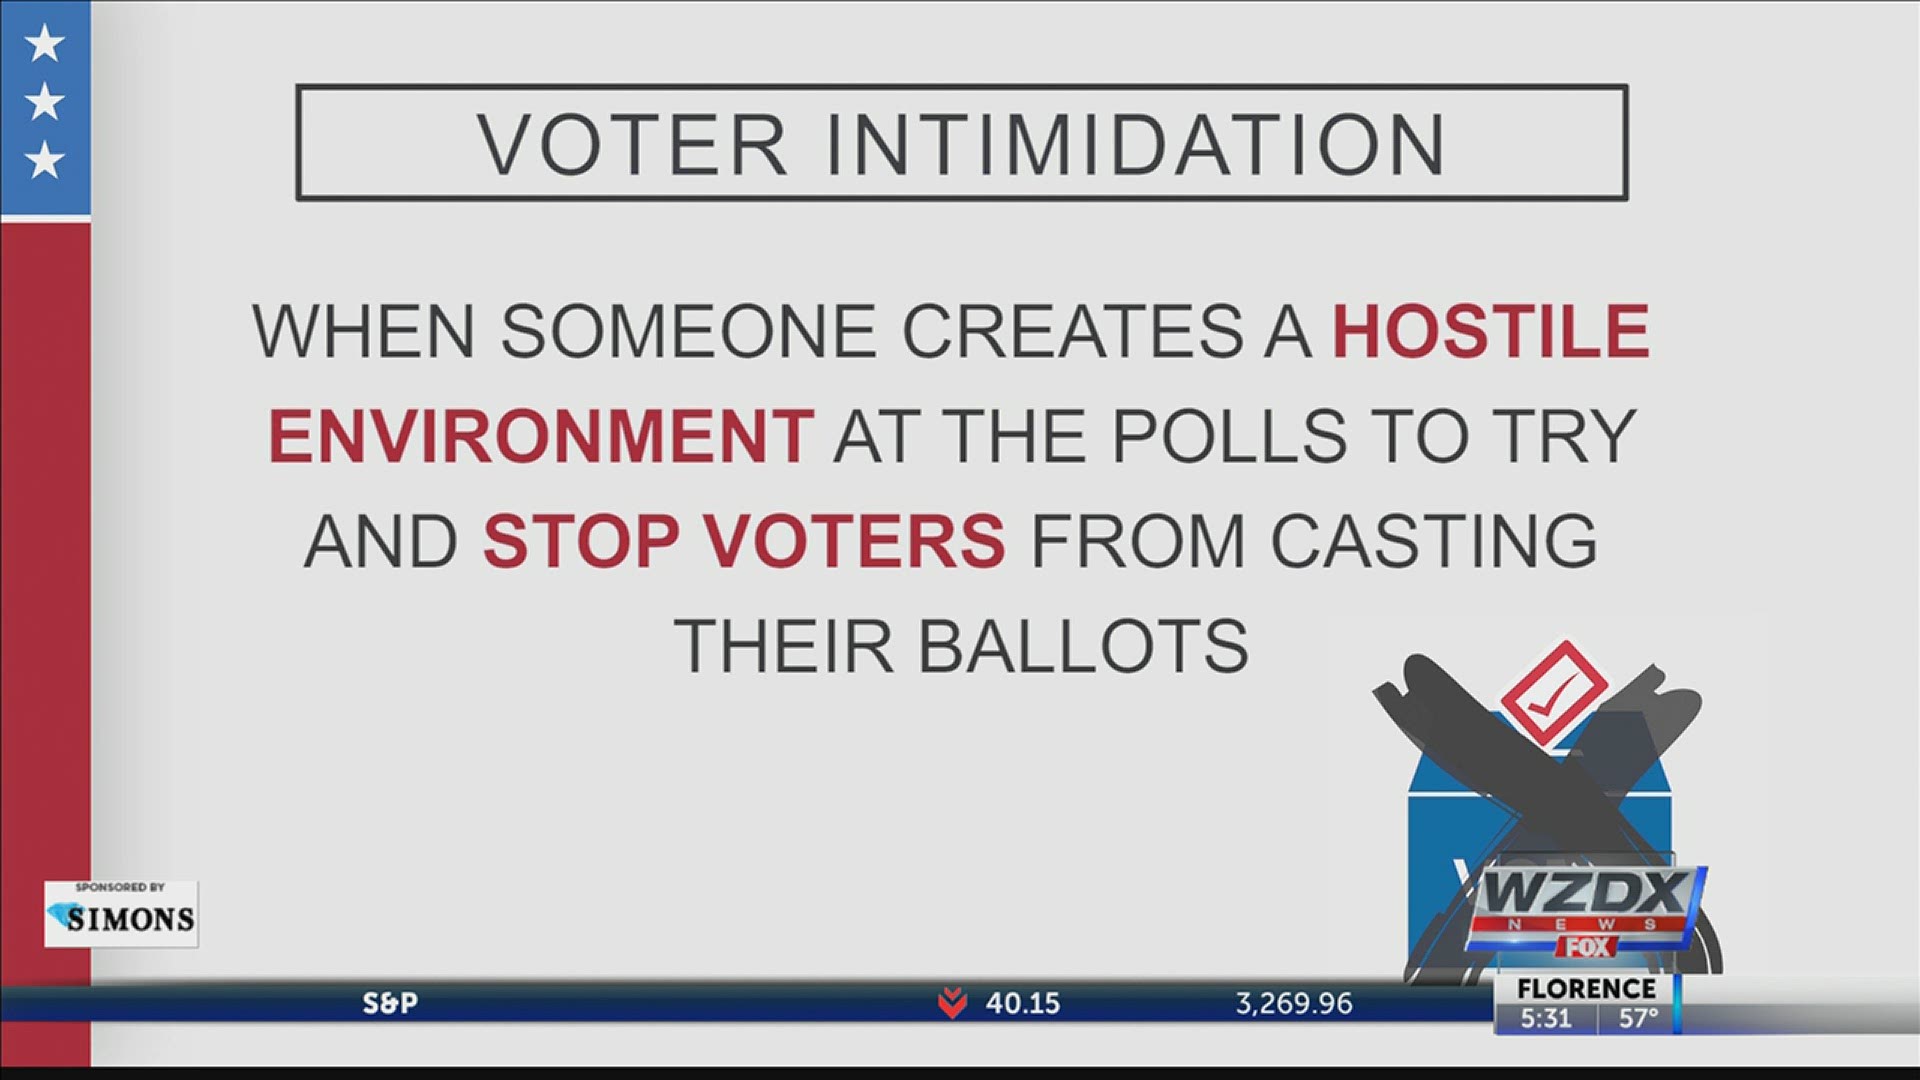 Voter intimidation is when someone creates a hostile environment at the polls to try and stop voters from casting their ballots.